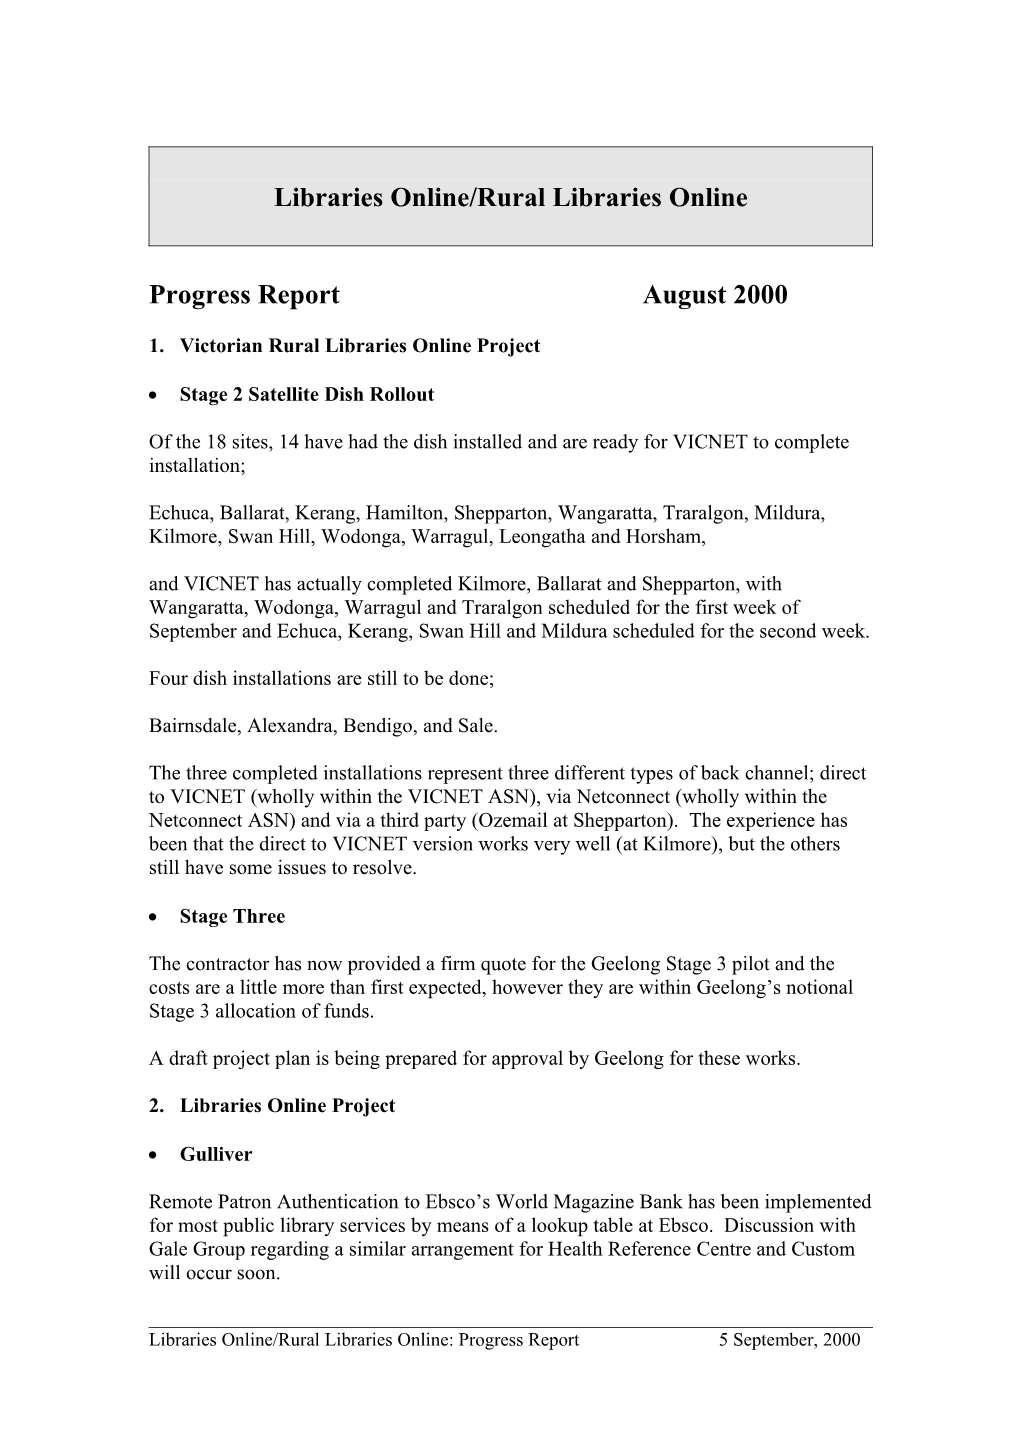 Libraries Online Project 1: Progress Report, March 1999